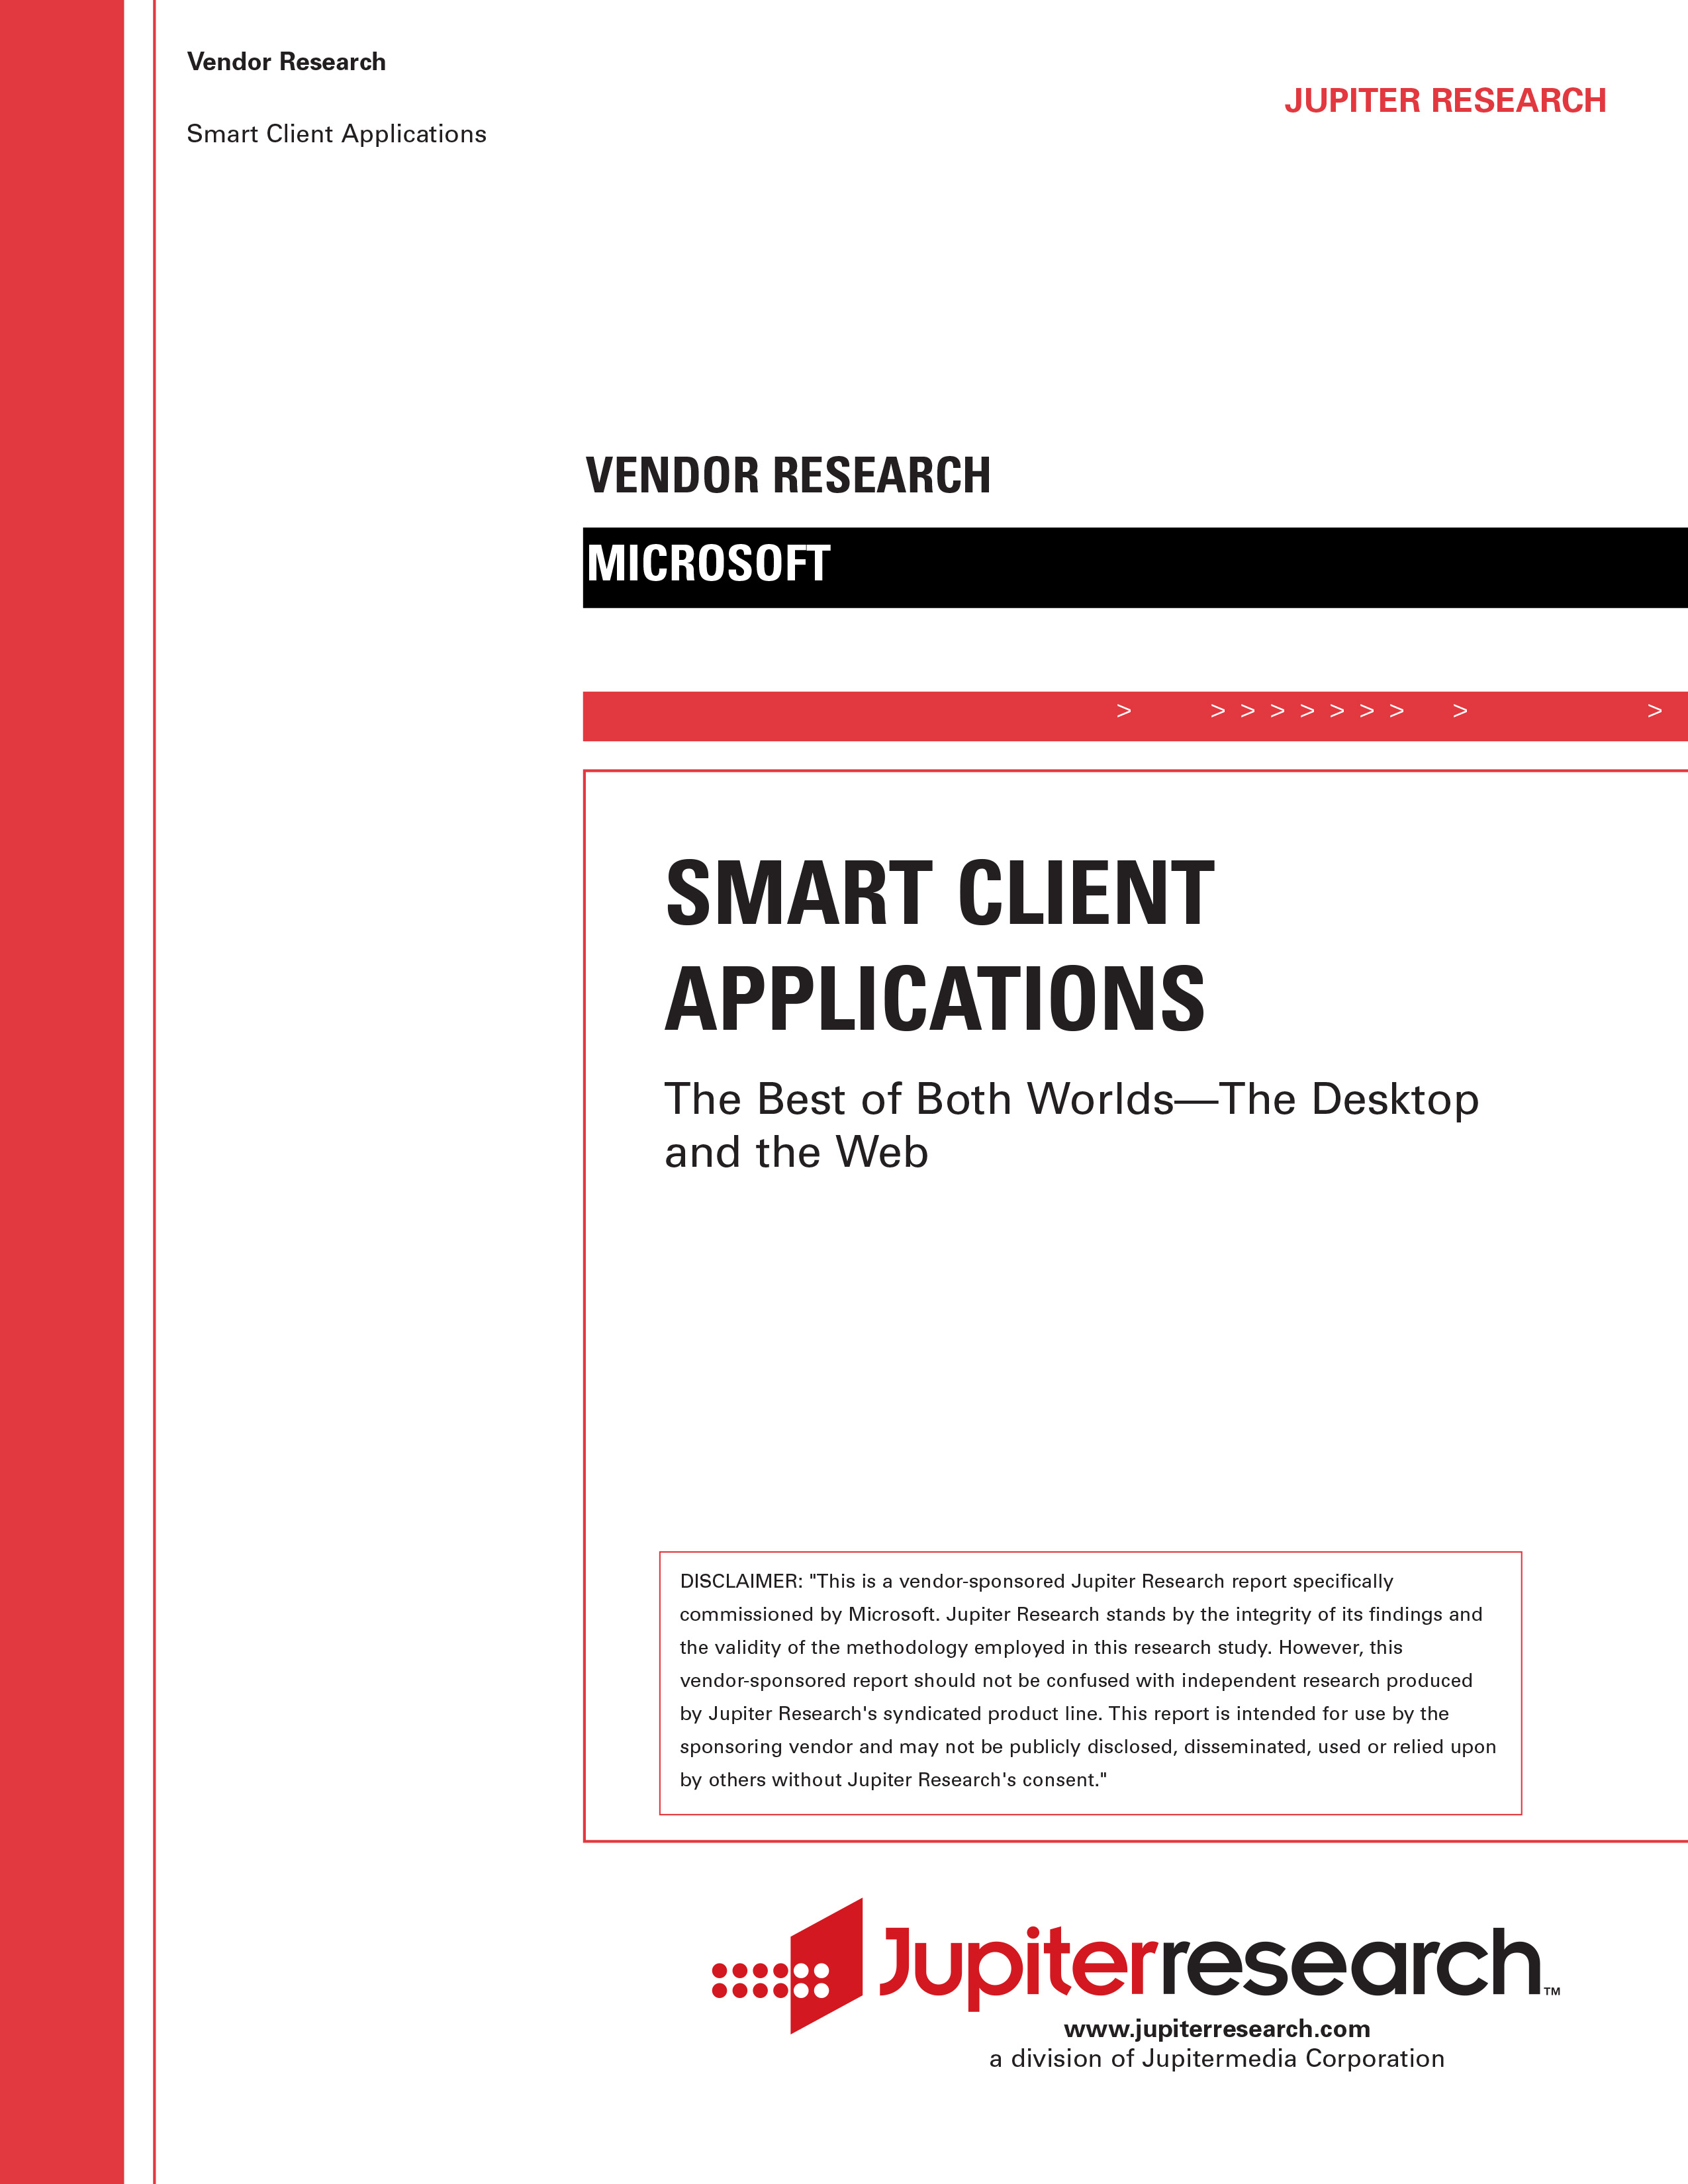 Smart Client Applications - The Best of Both Worlds - A Juniper Research Paper